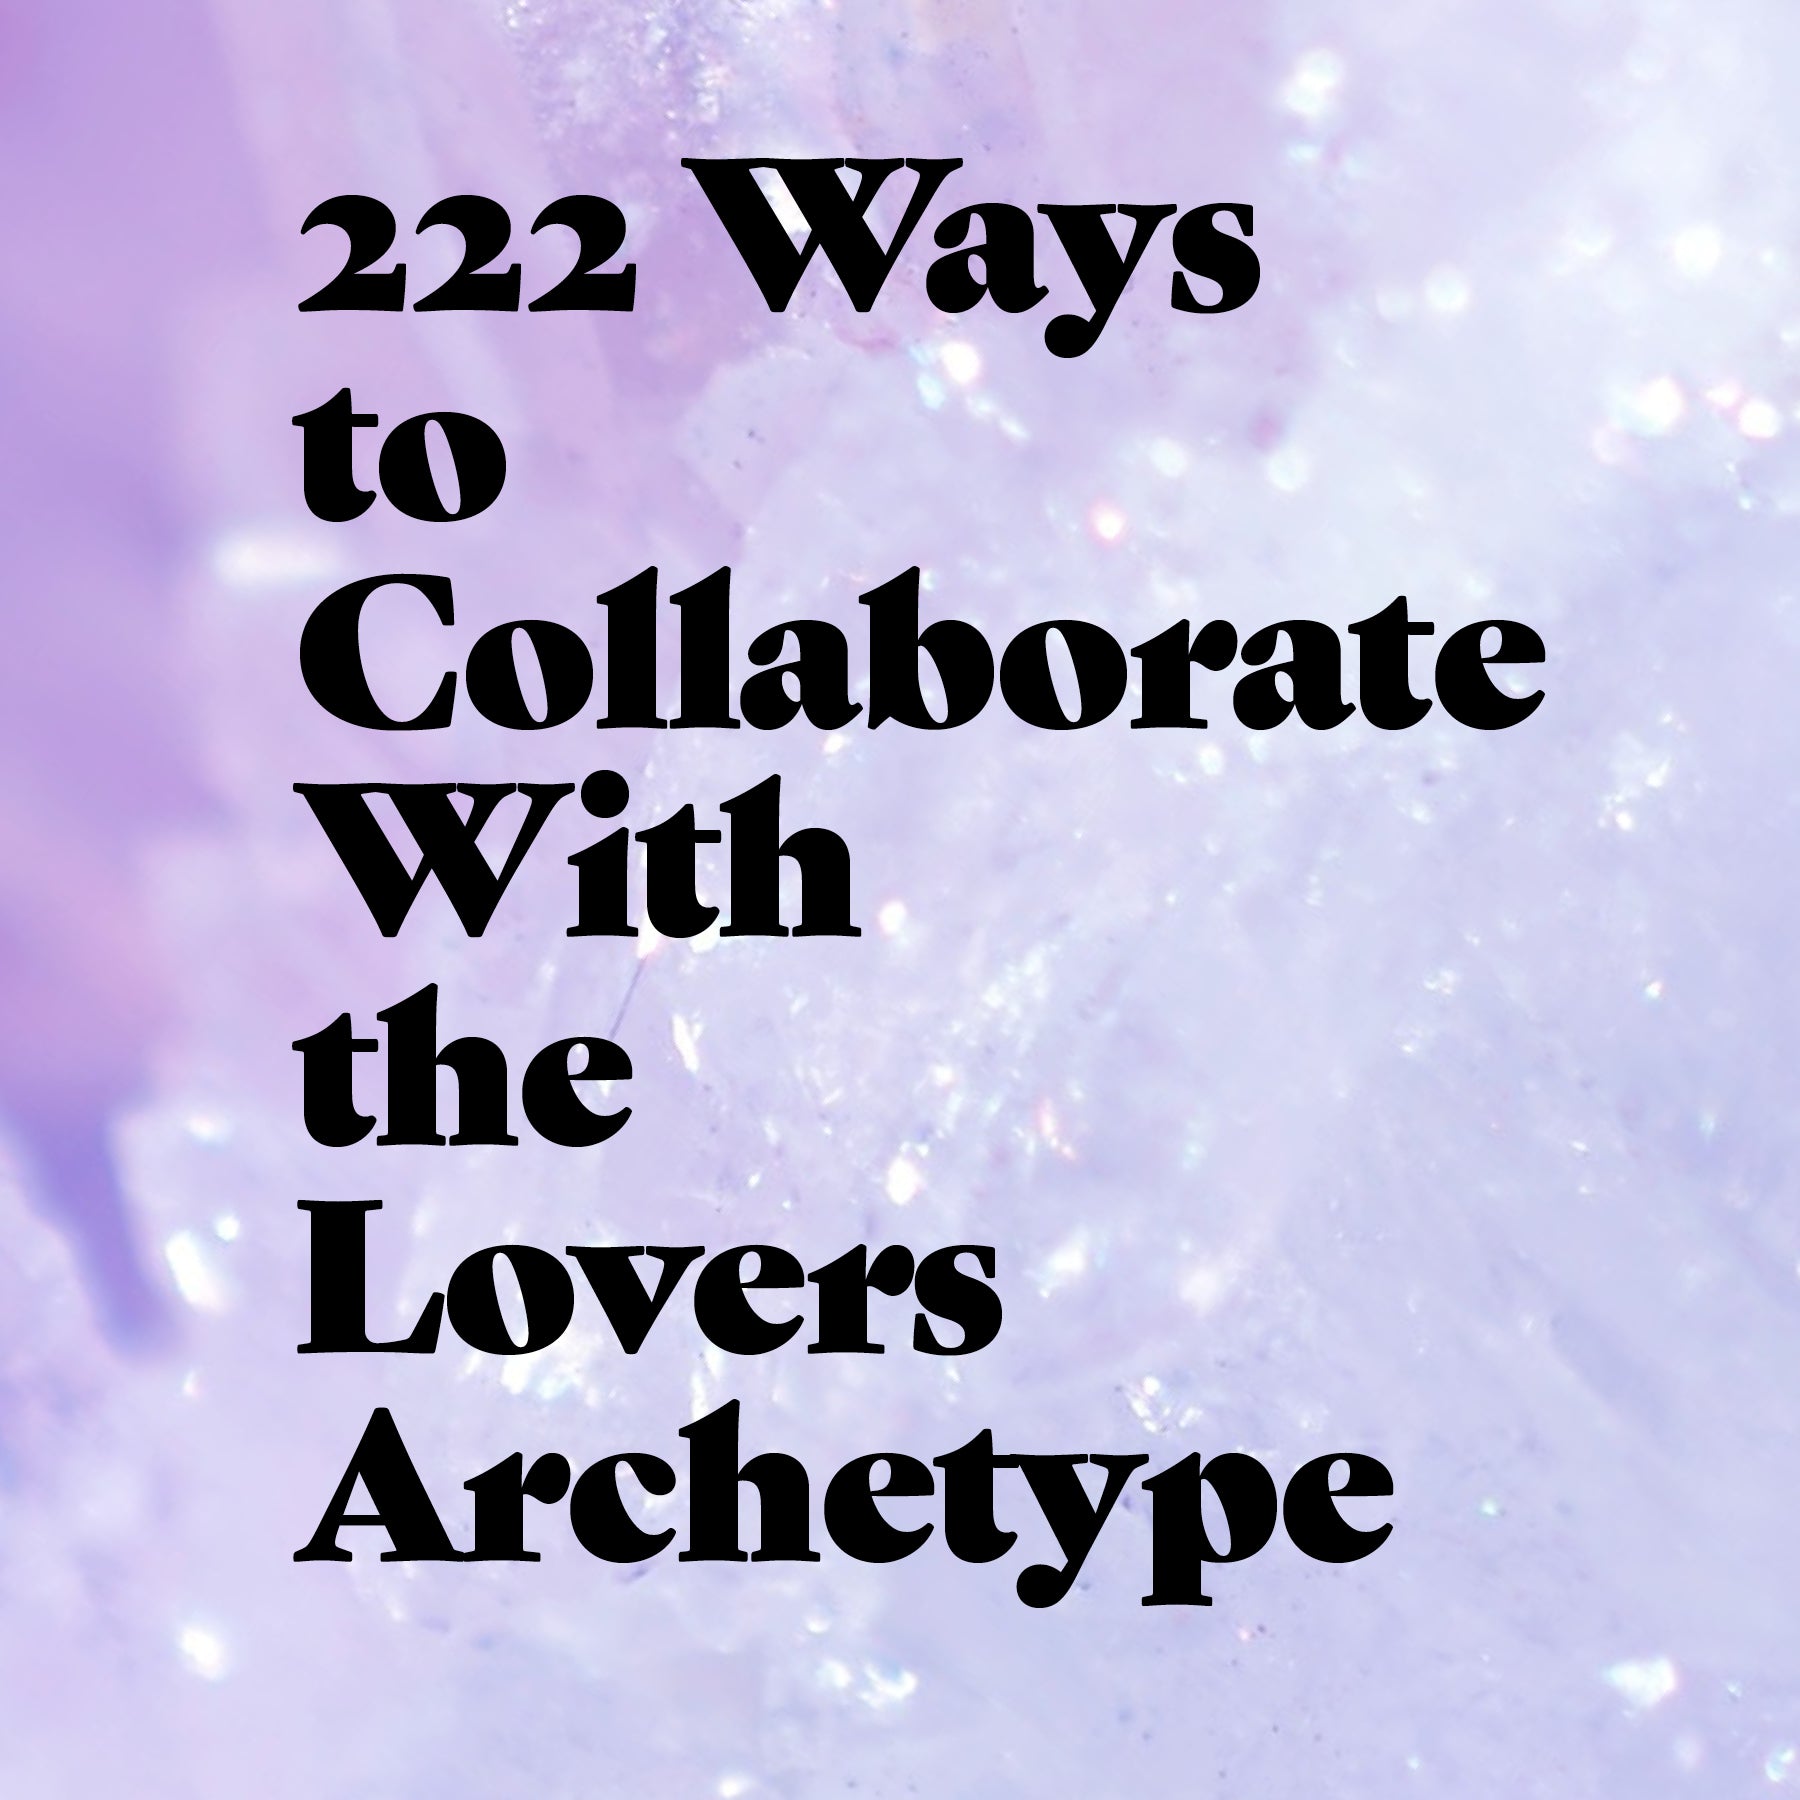 Lovers Year 2022 Meaning | 222 Ways to Collaborate with the Lovers Archetype by Sarah Faith Gottesdiener